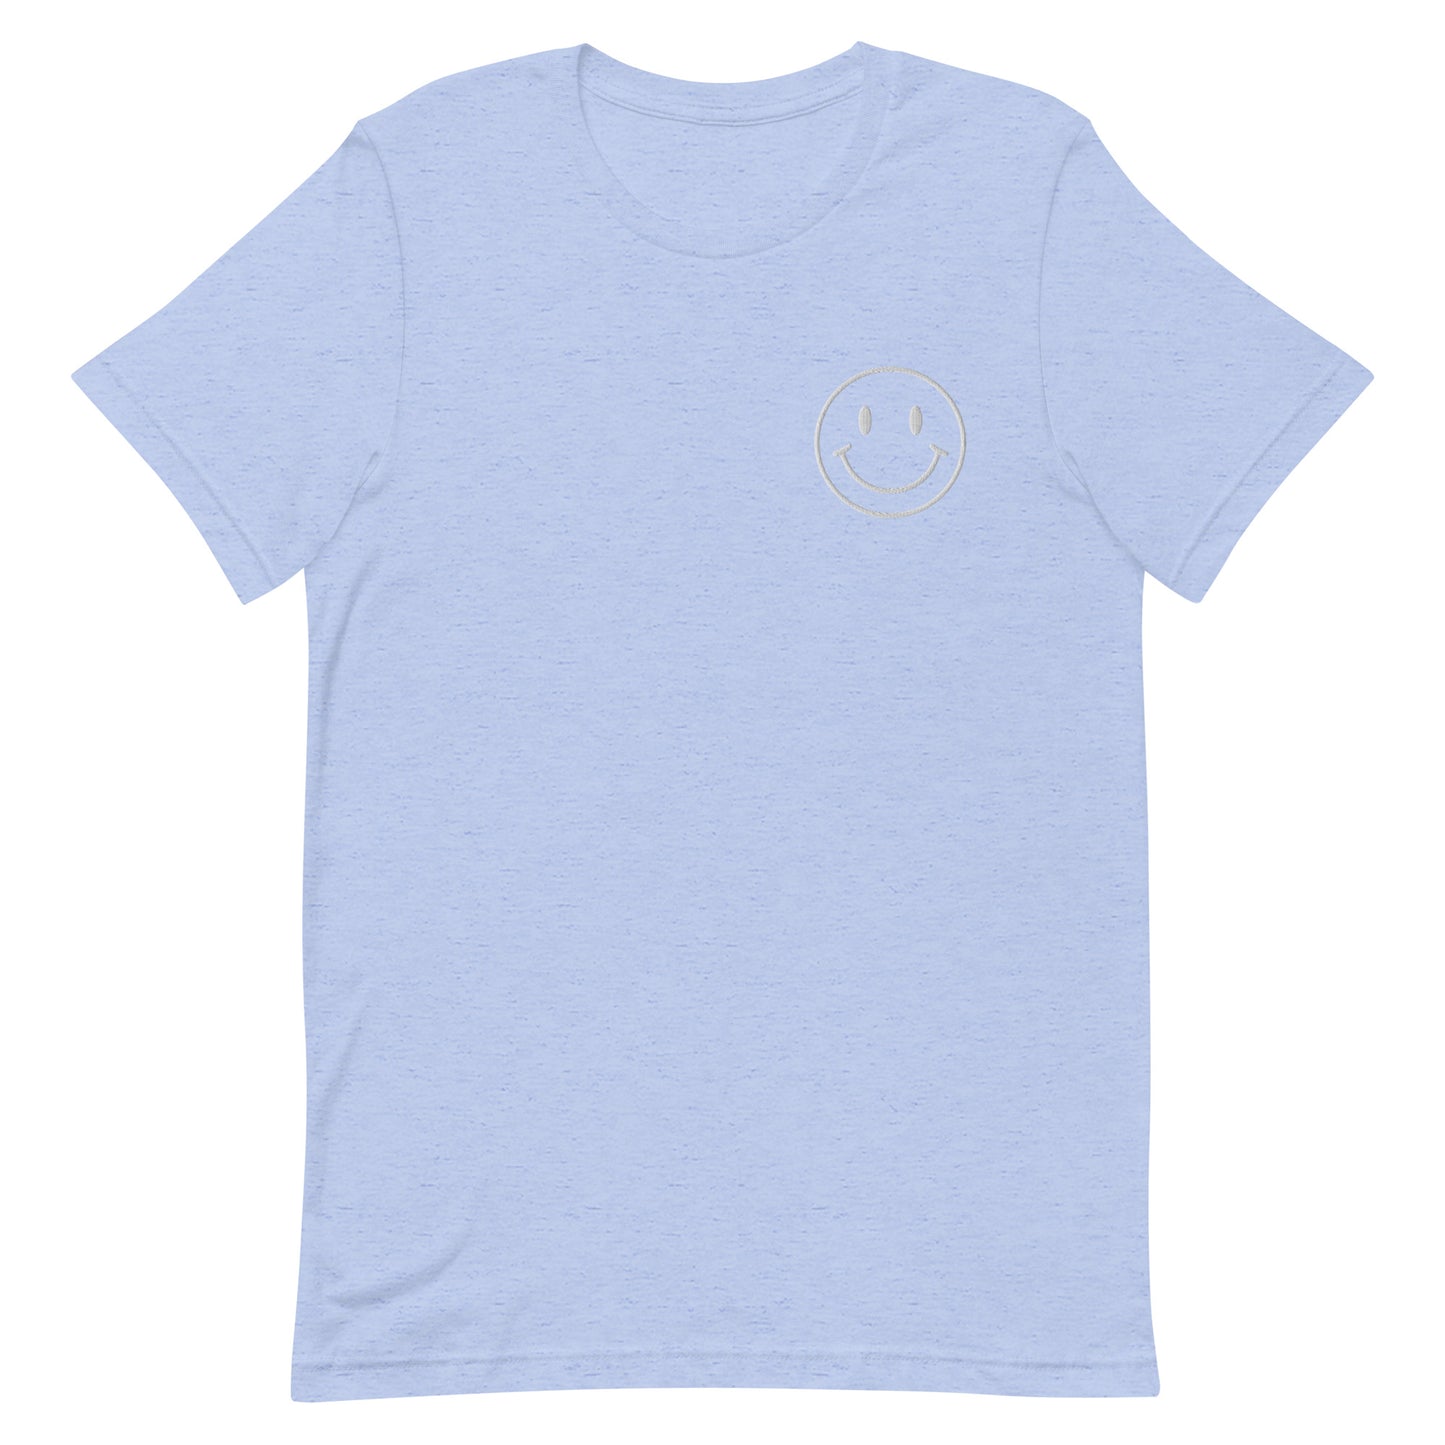 Embroidered Smiley Face Tee